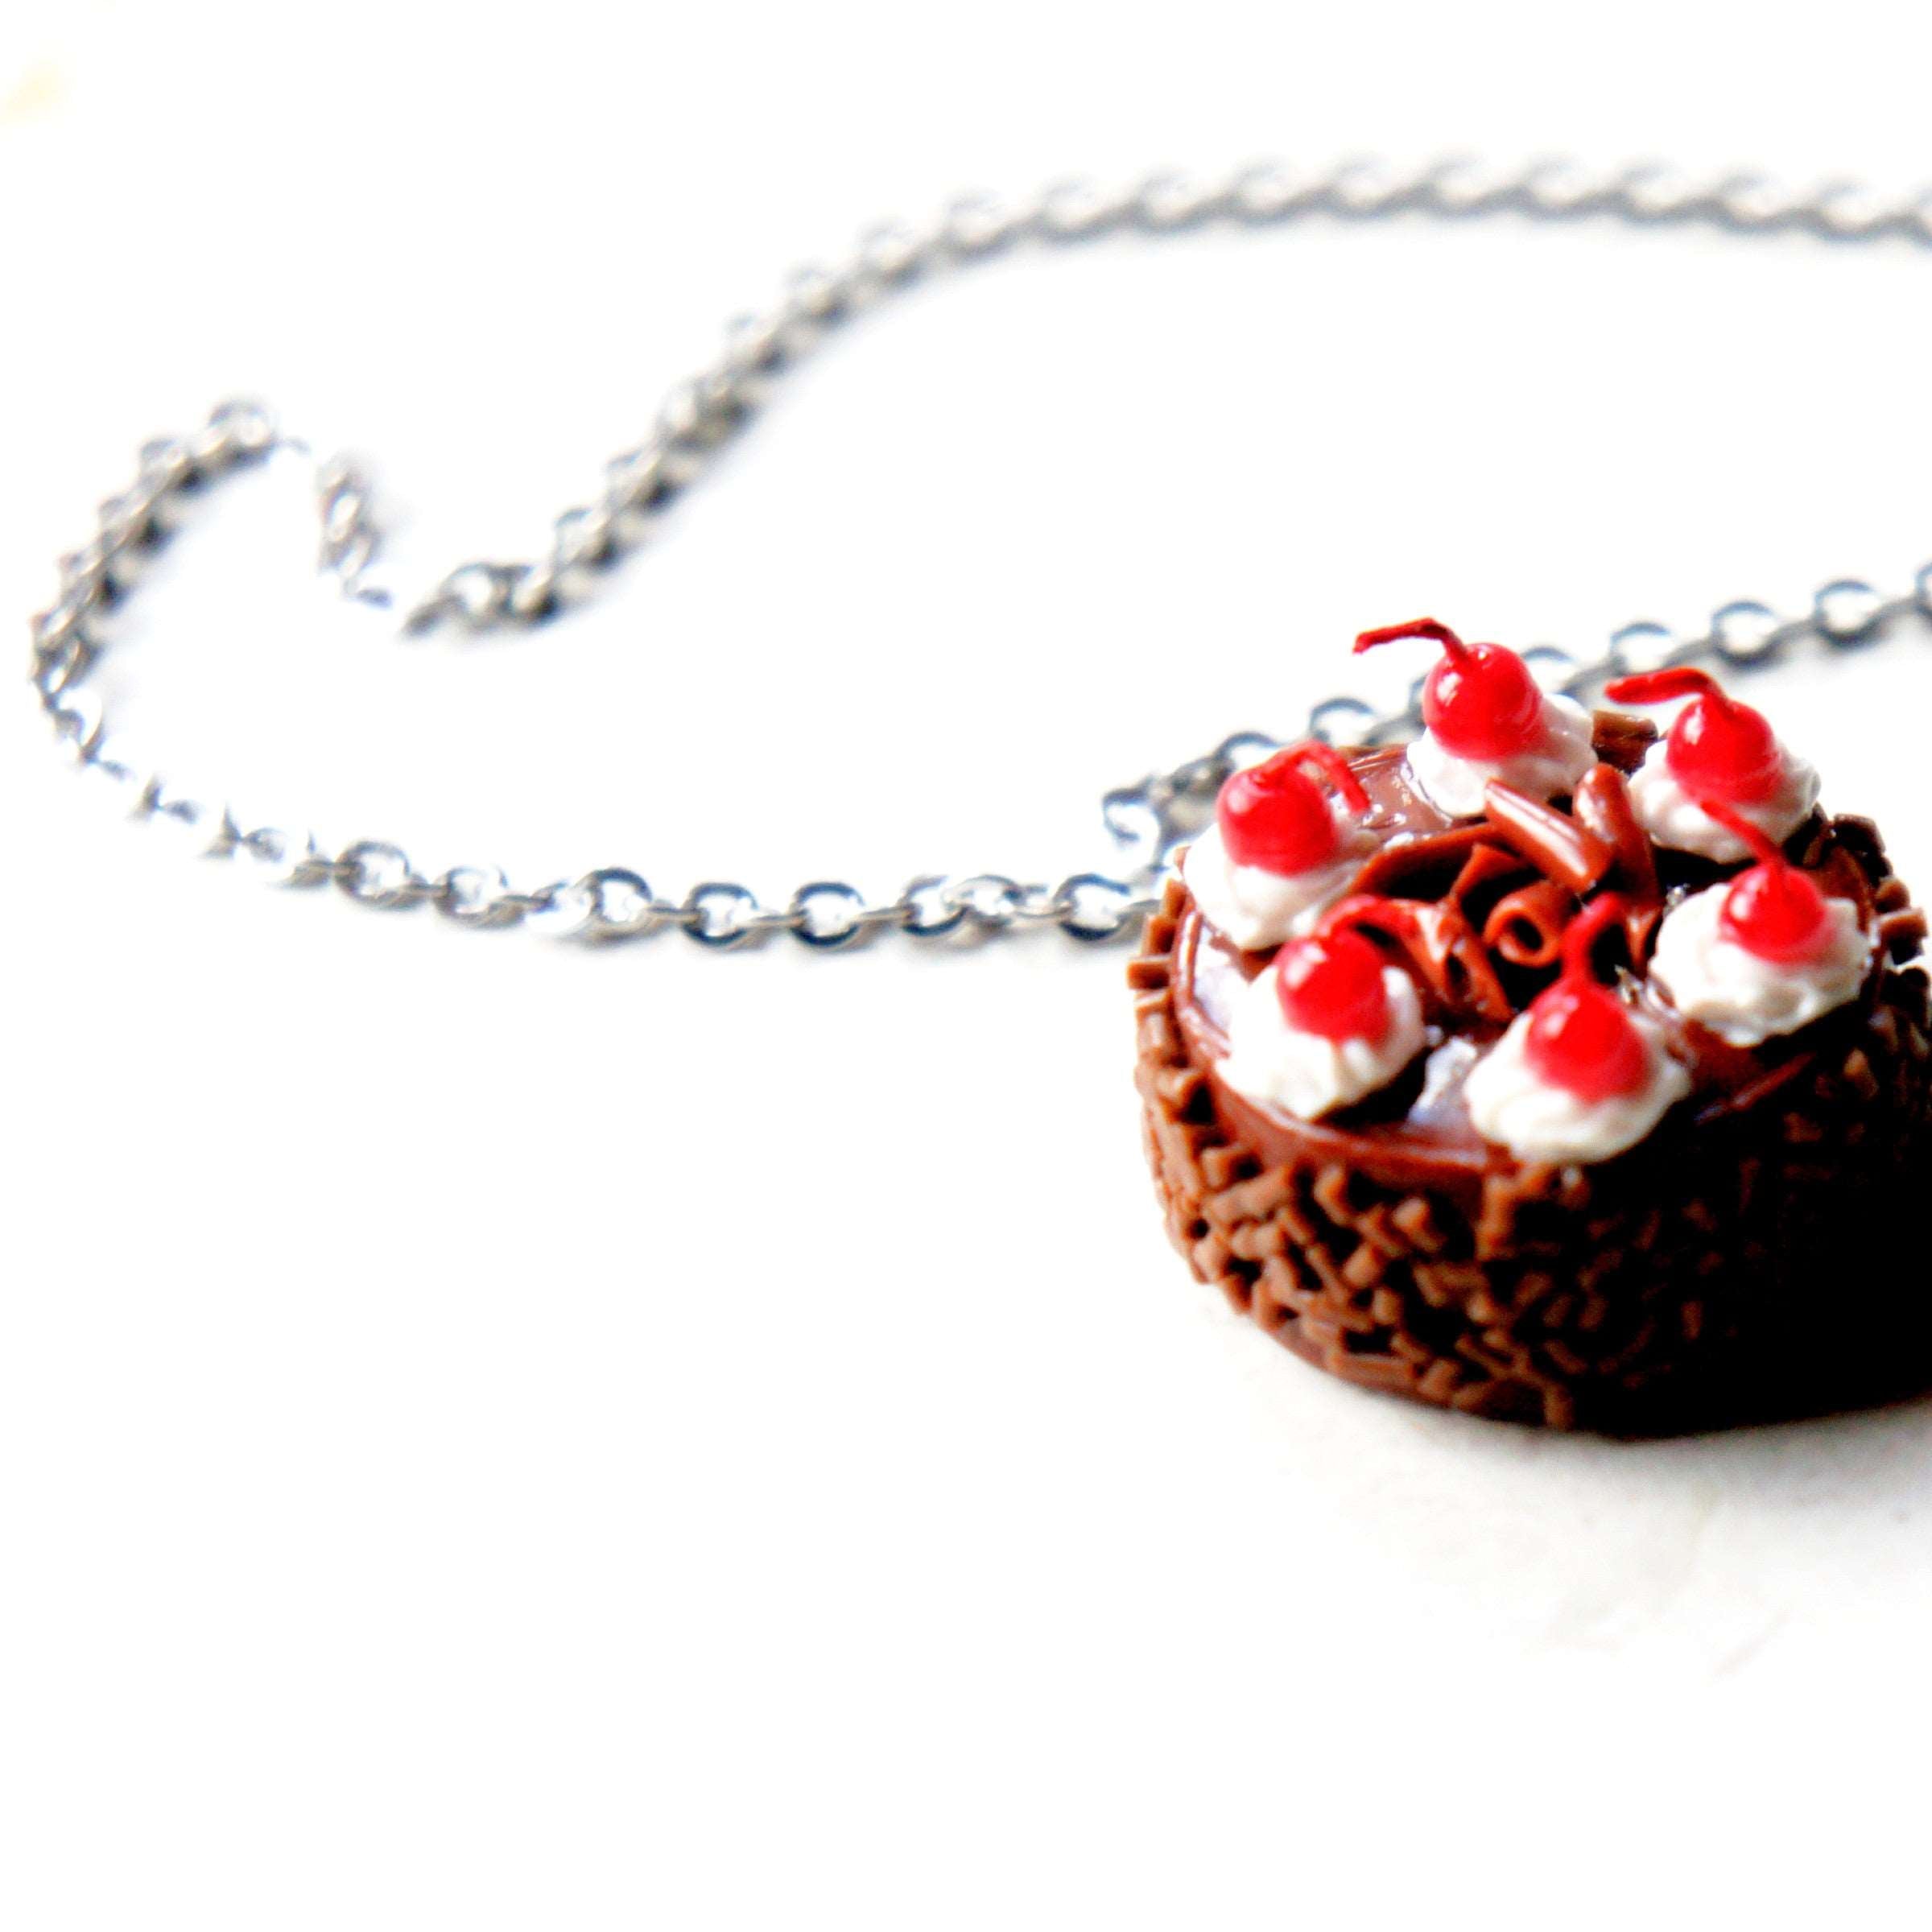 Black Forest Cake Necklace - Jillicious charms and accessories